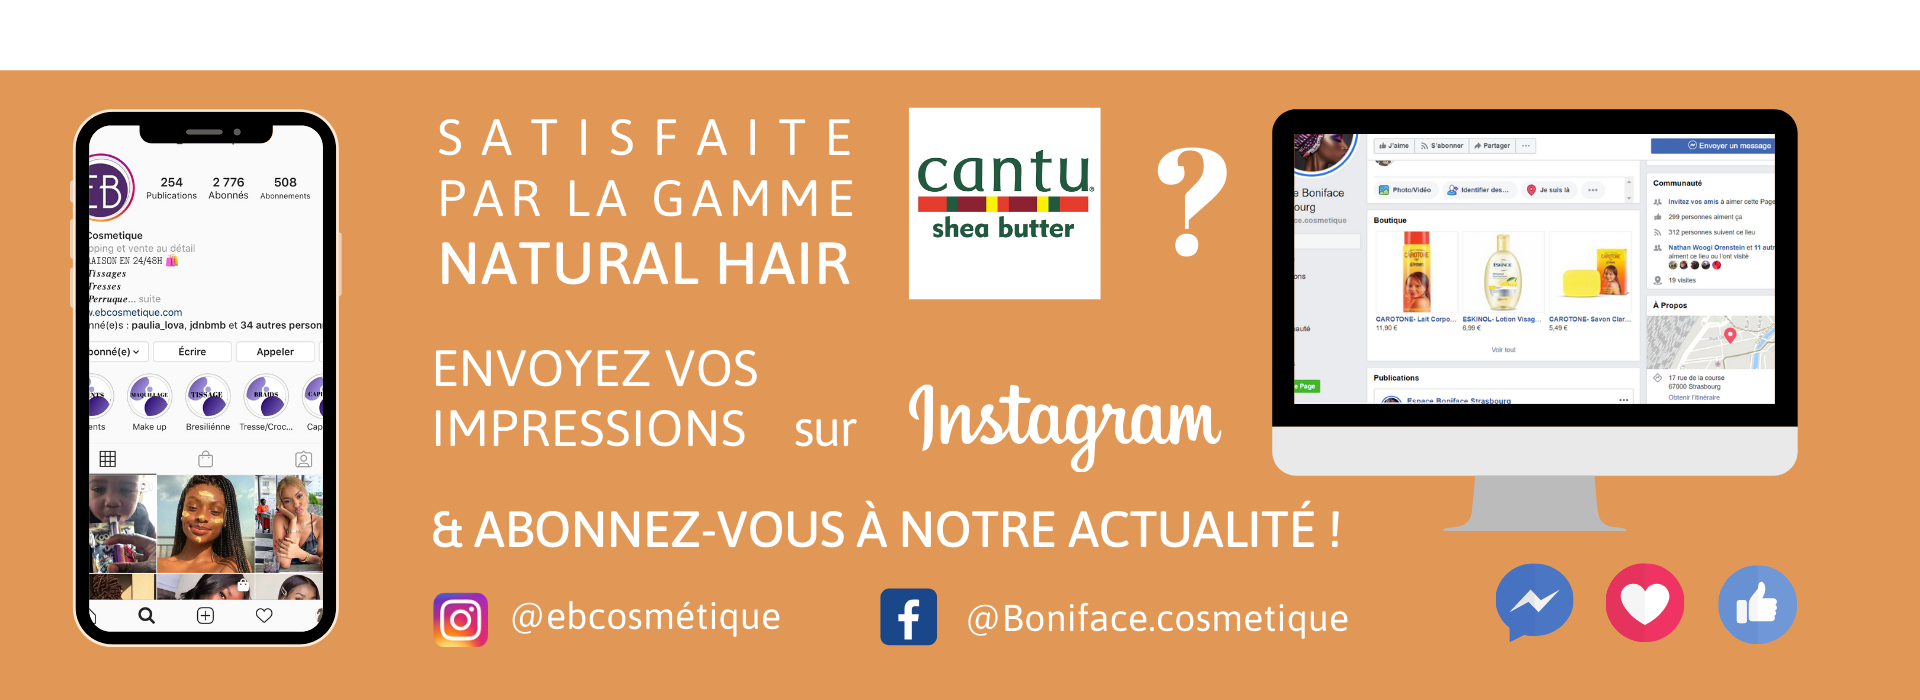 fiche produit ebcosmetique cantu shea butter natural hair leave-in conditioning cream routine cheveux afro facebook instagram